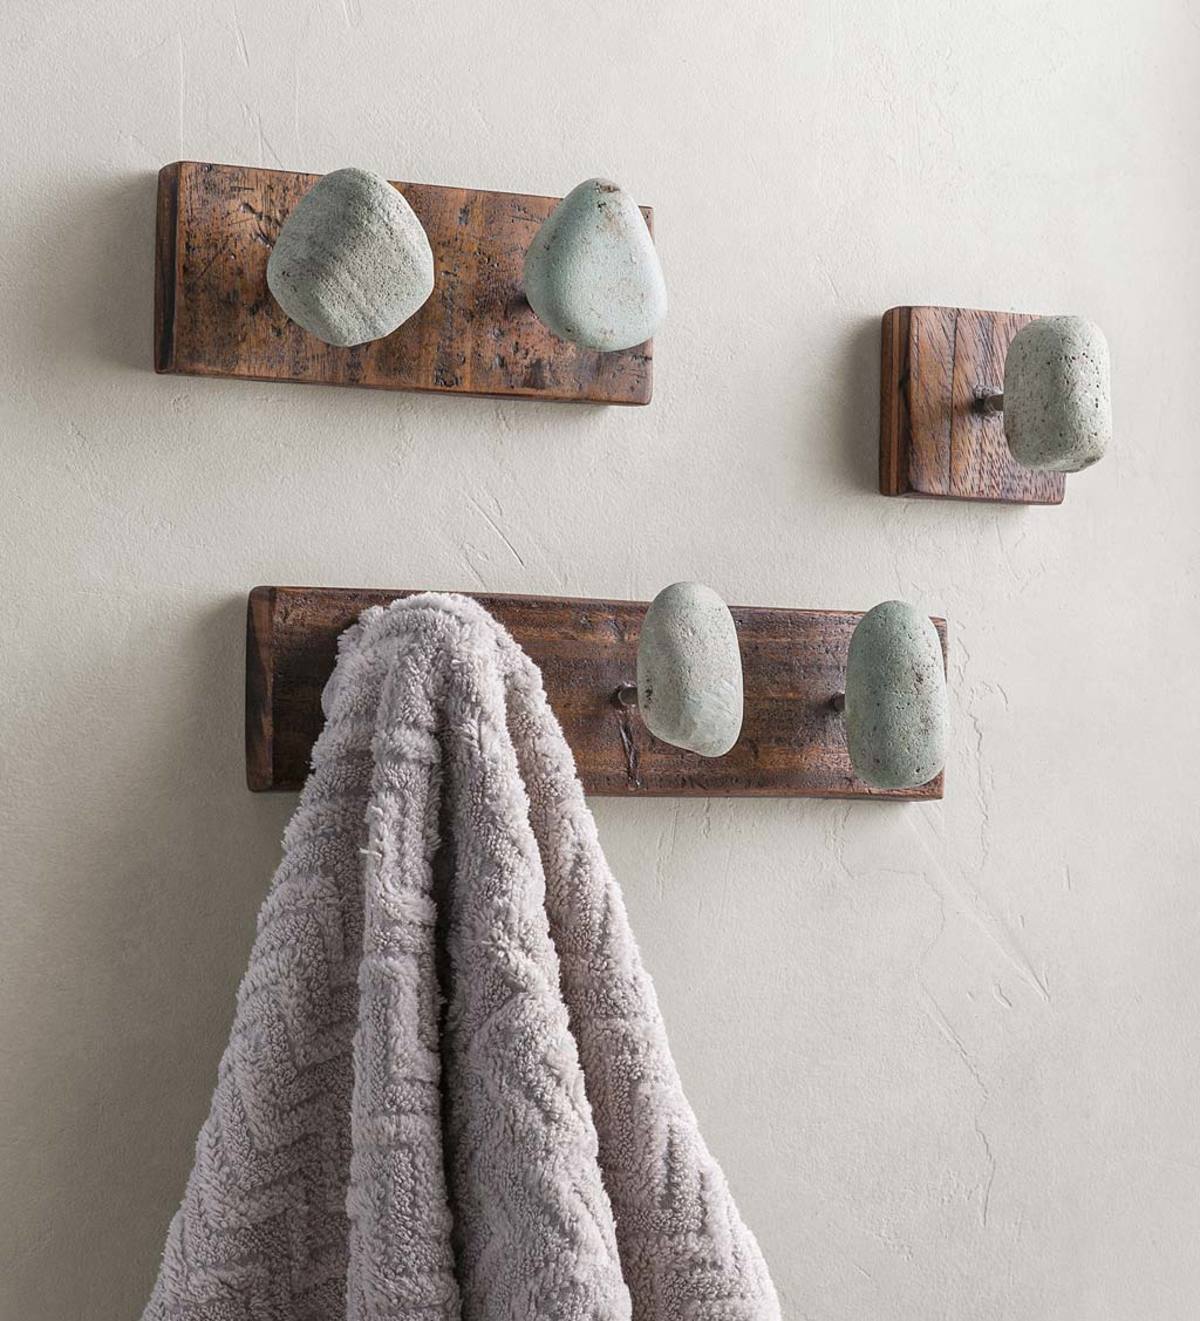 Natural Stone and Recycled Wood Hangers